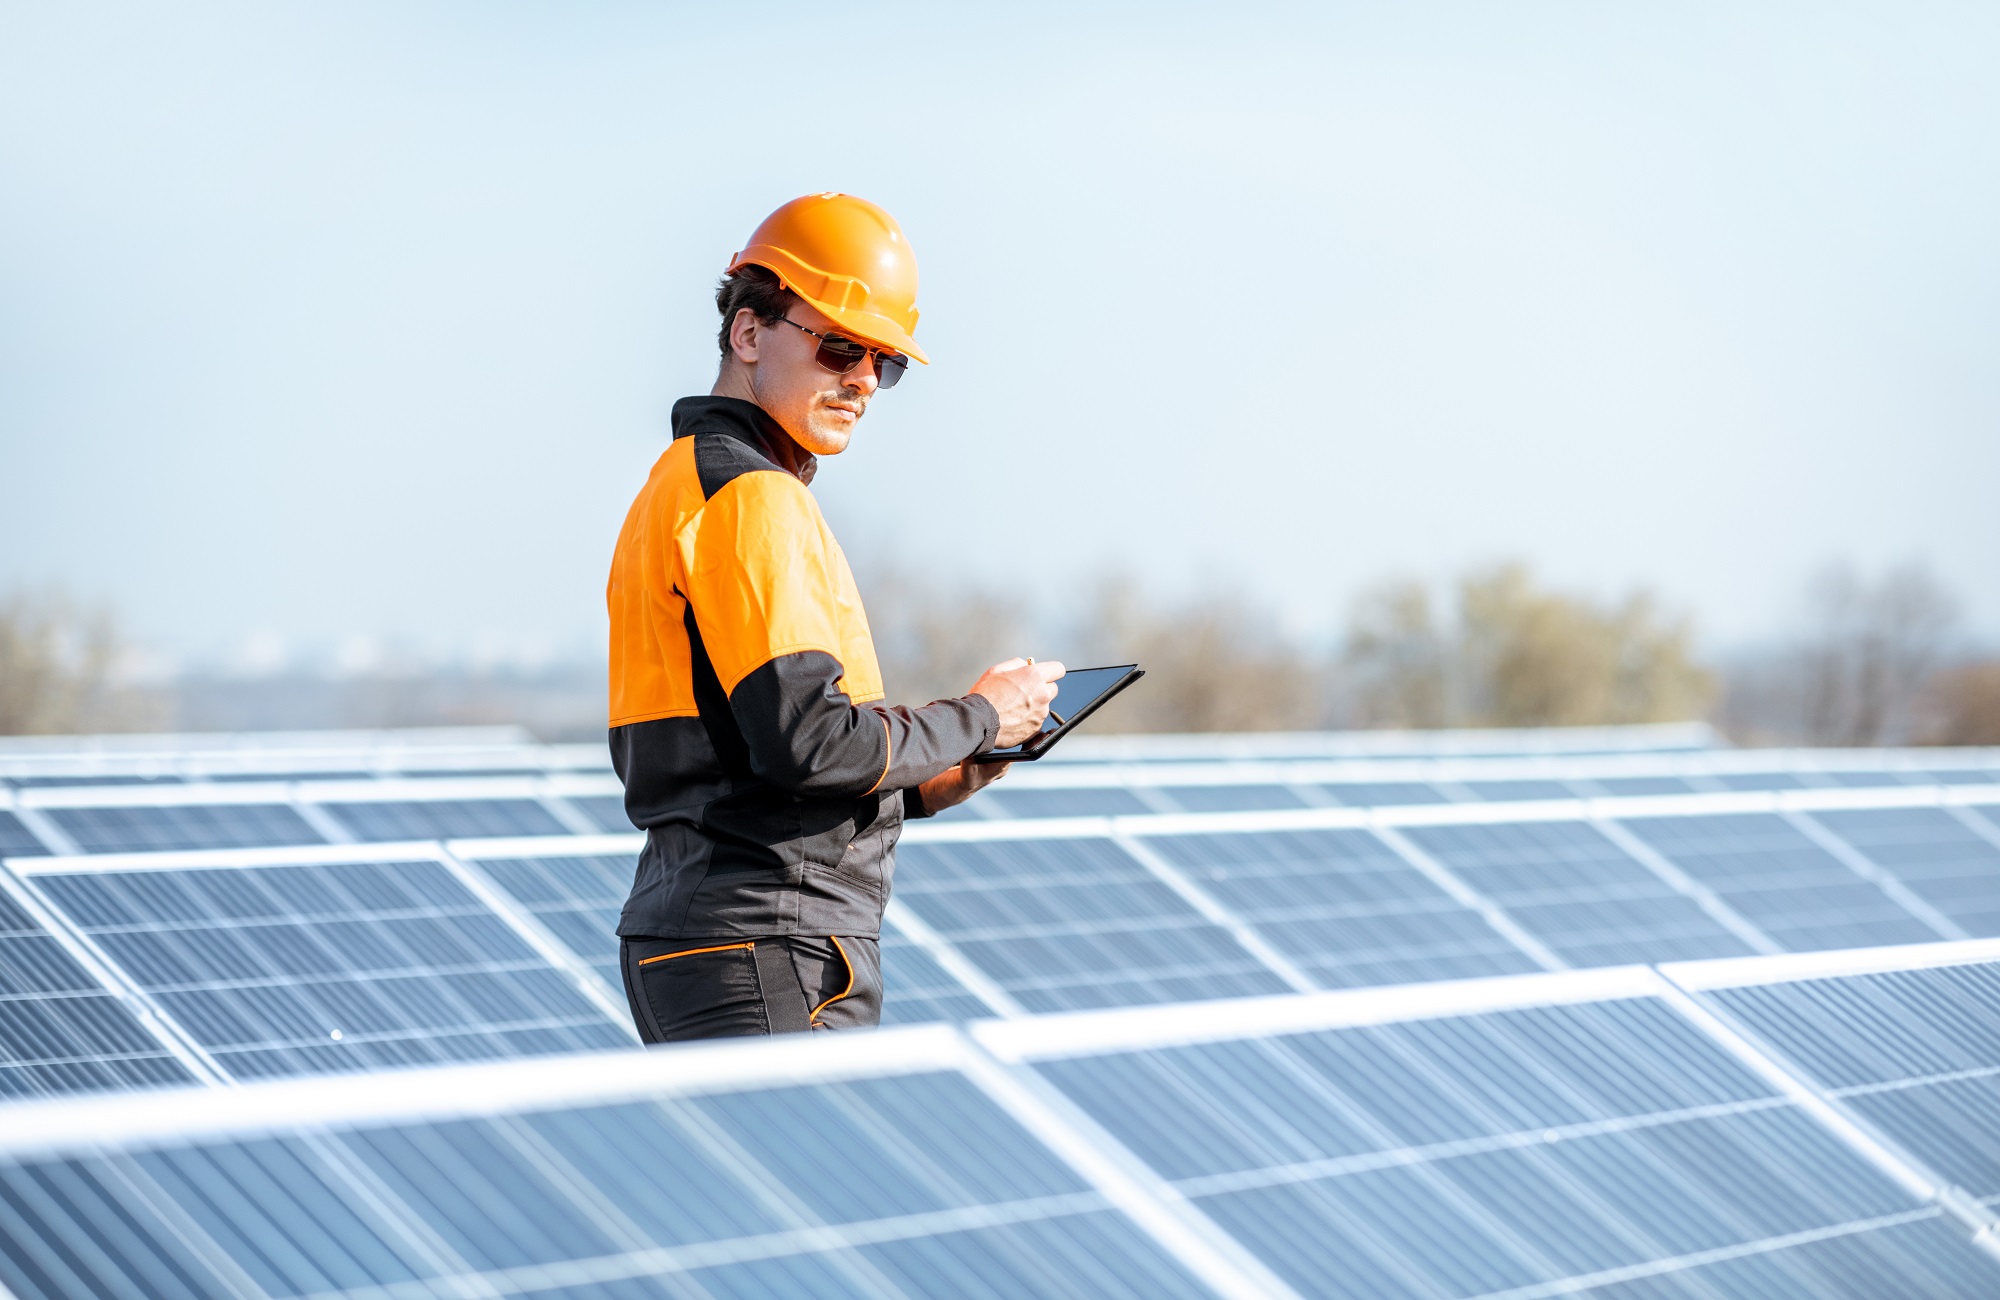 Engineer in protective workwear carrying out service of solar panels with digital tablet on a photovoltaic rooftop plant. Concept of maintenance and setup of solar power station